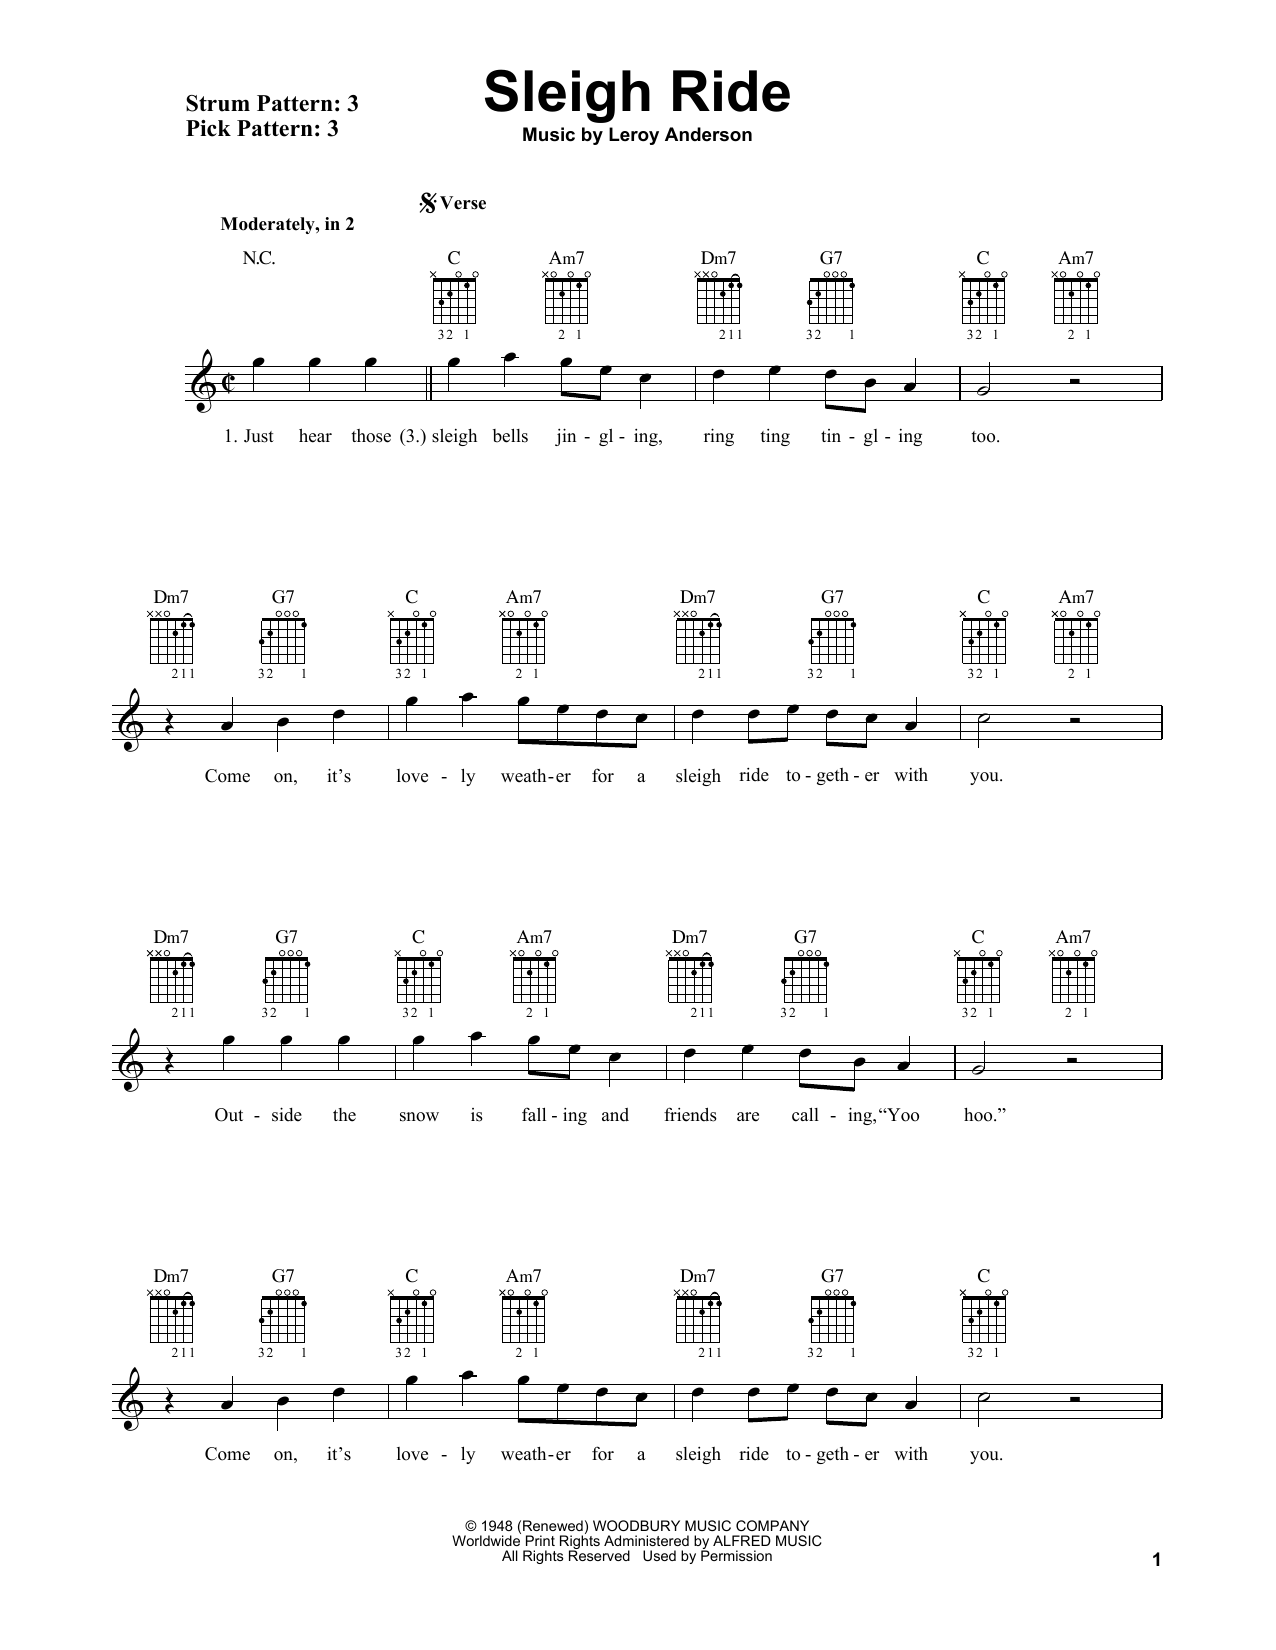 Leroy Anderson "Sleigh Ride" Sheet Music Notes, Chords | Piano Download